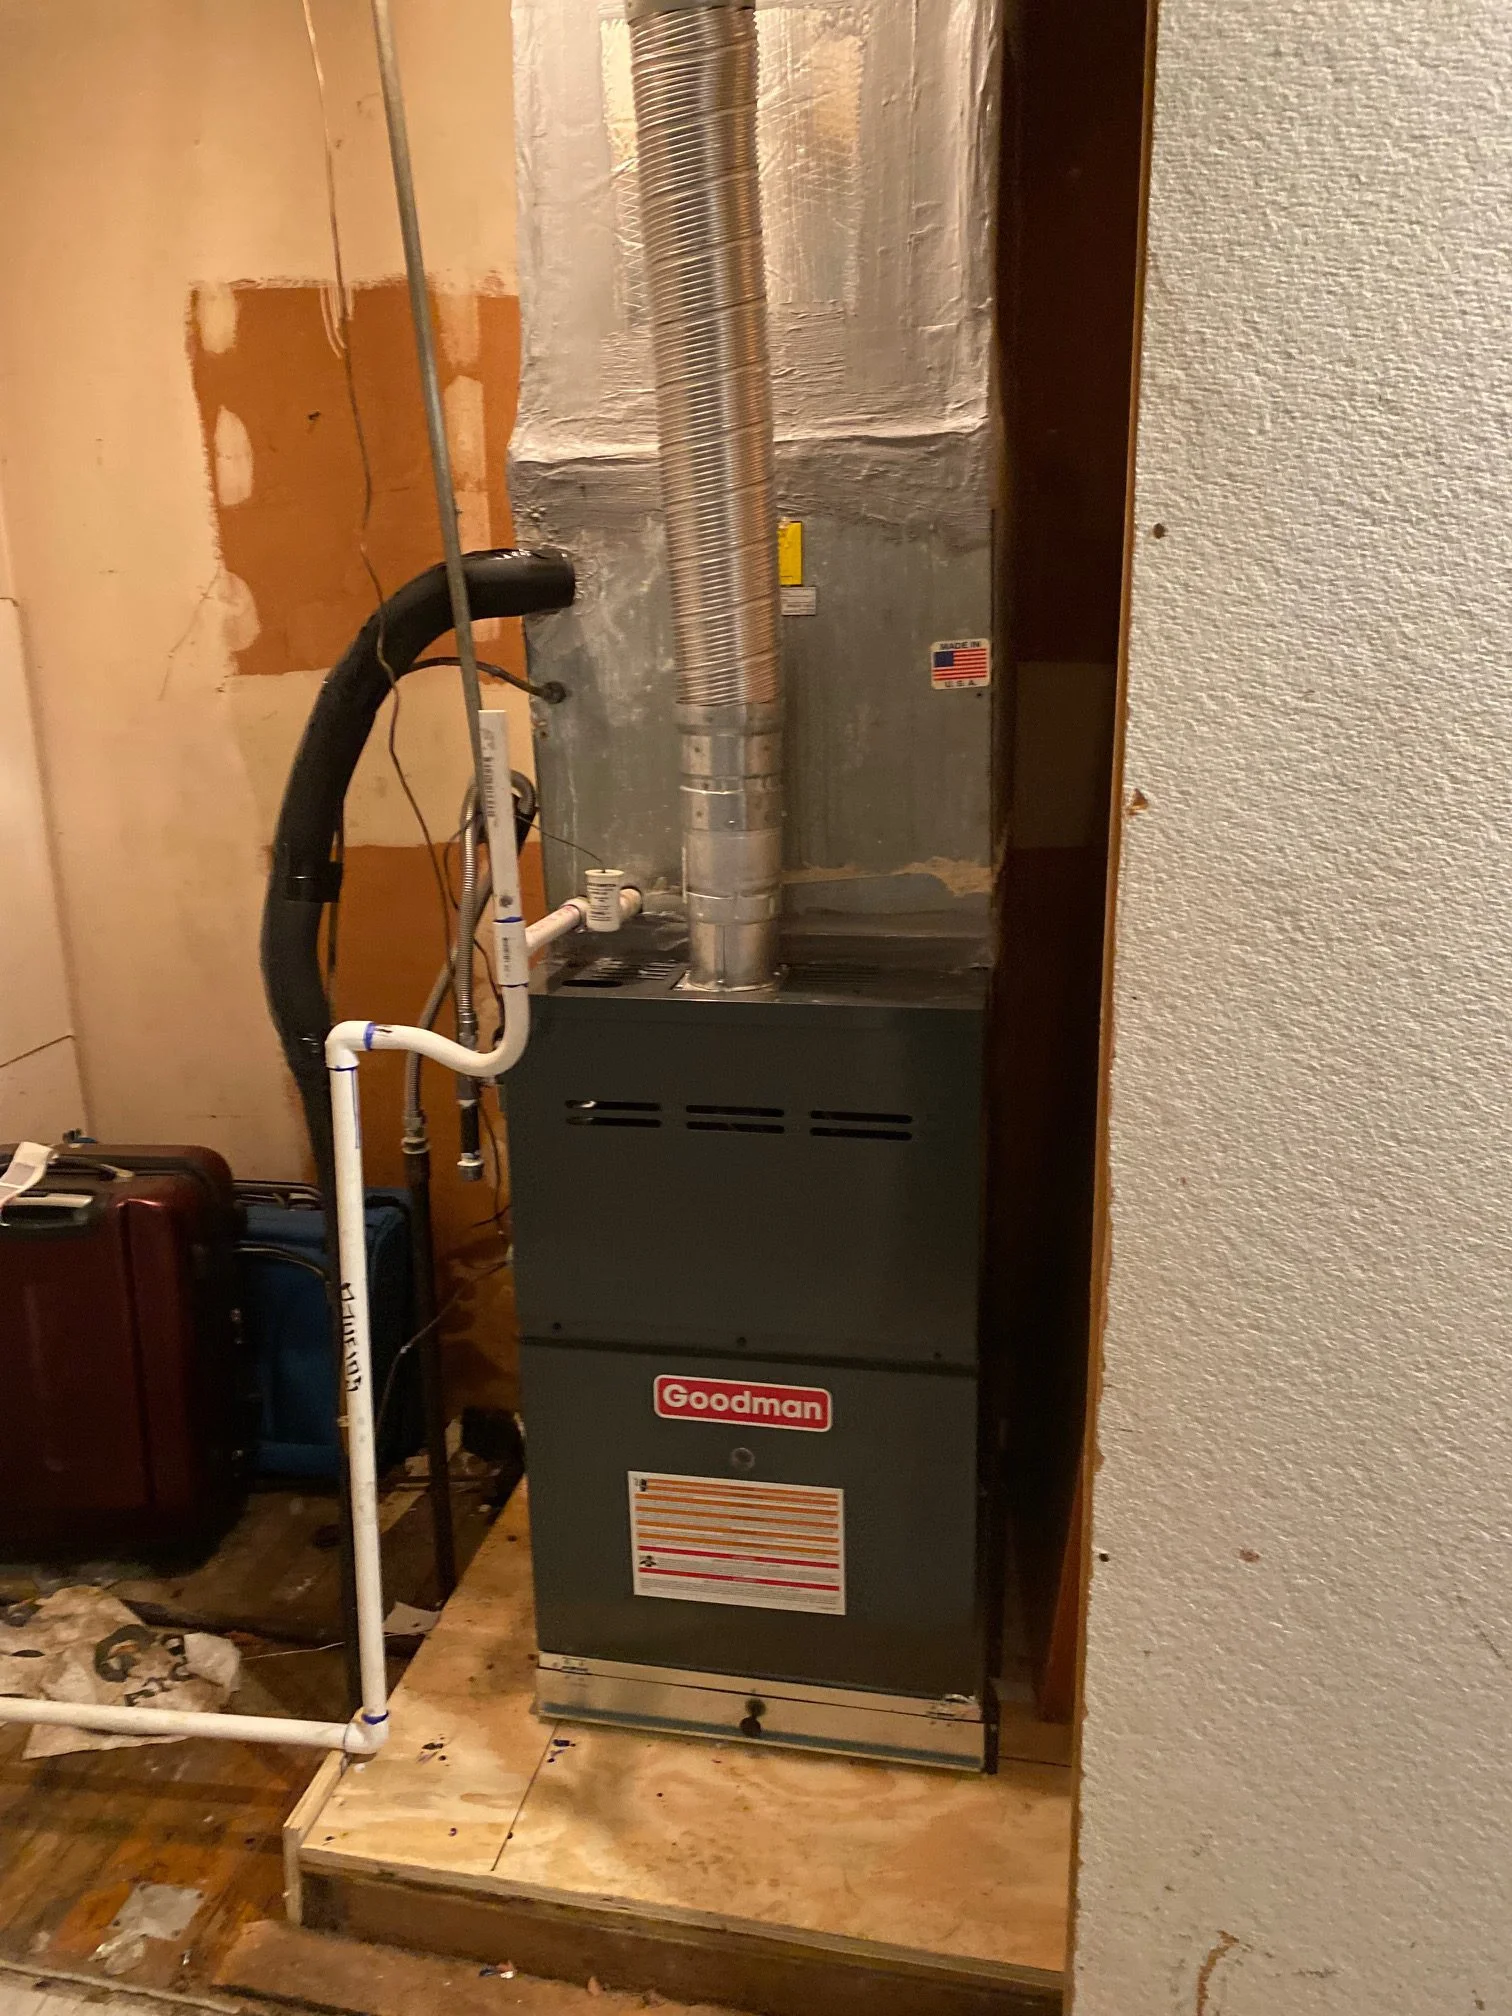 Completed installation of new complete HVAC system for our customer in Garland, Texas with a new platform, upflow furnace and evaporator coil with condensation float safety switch and flue pipe